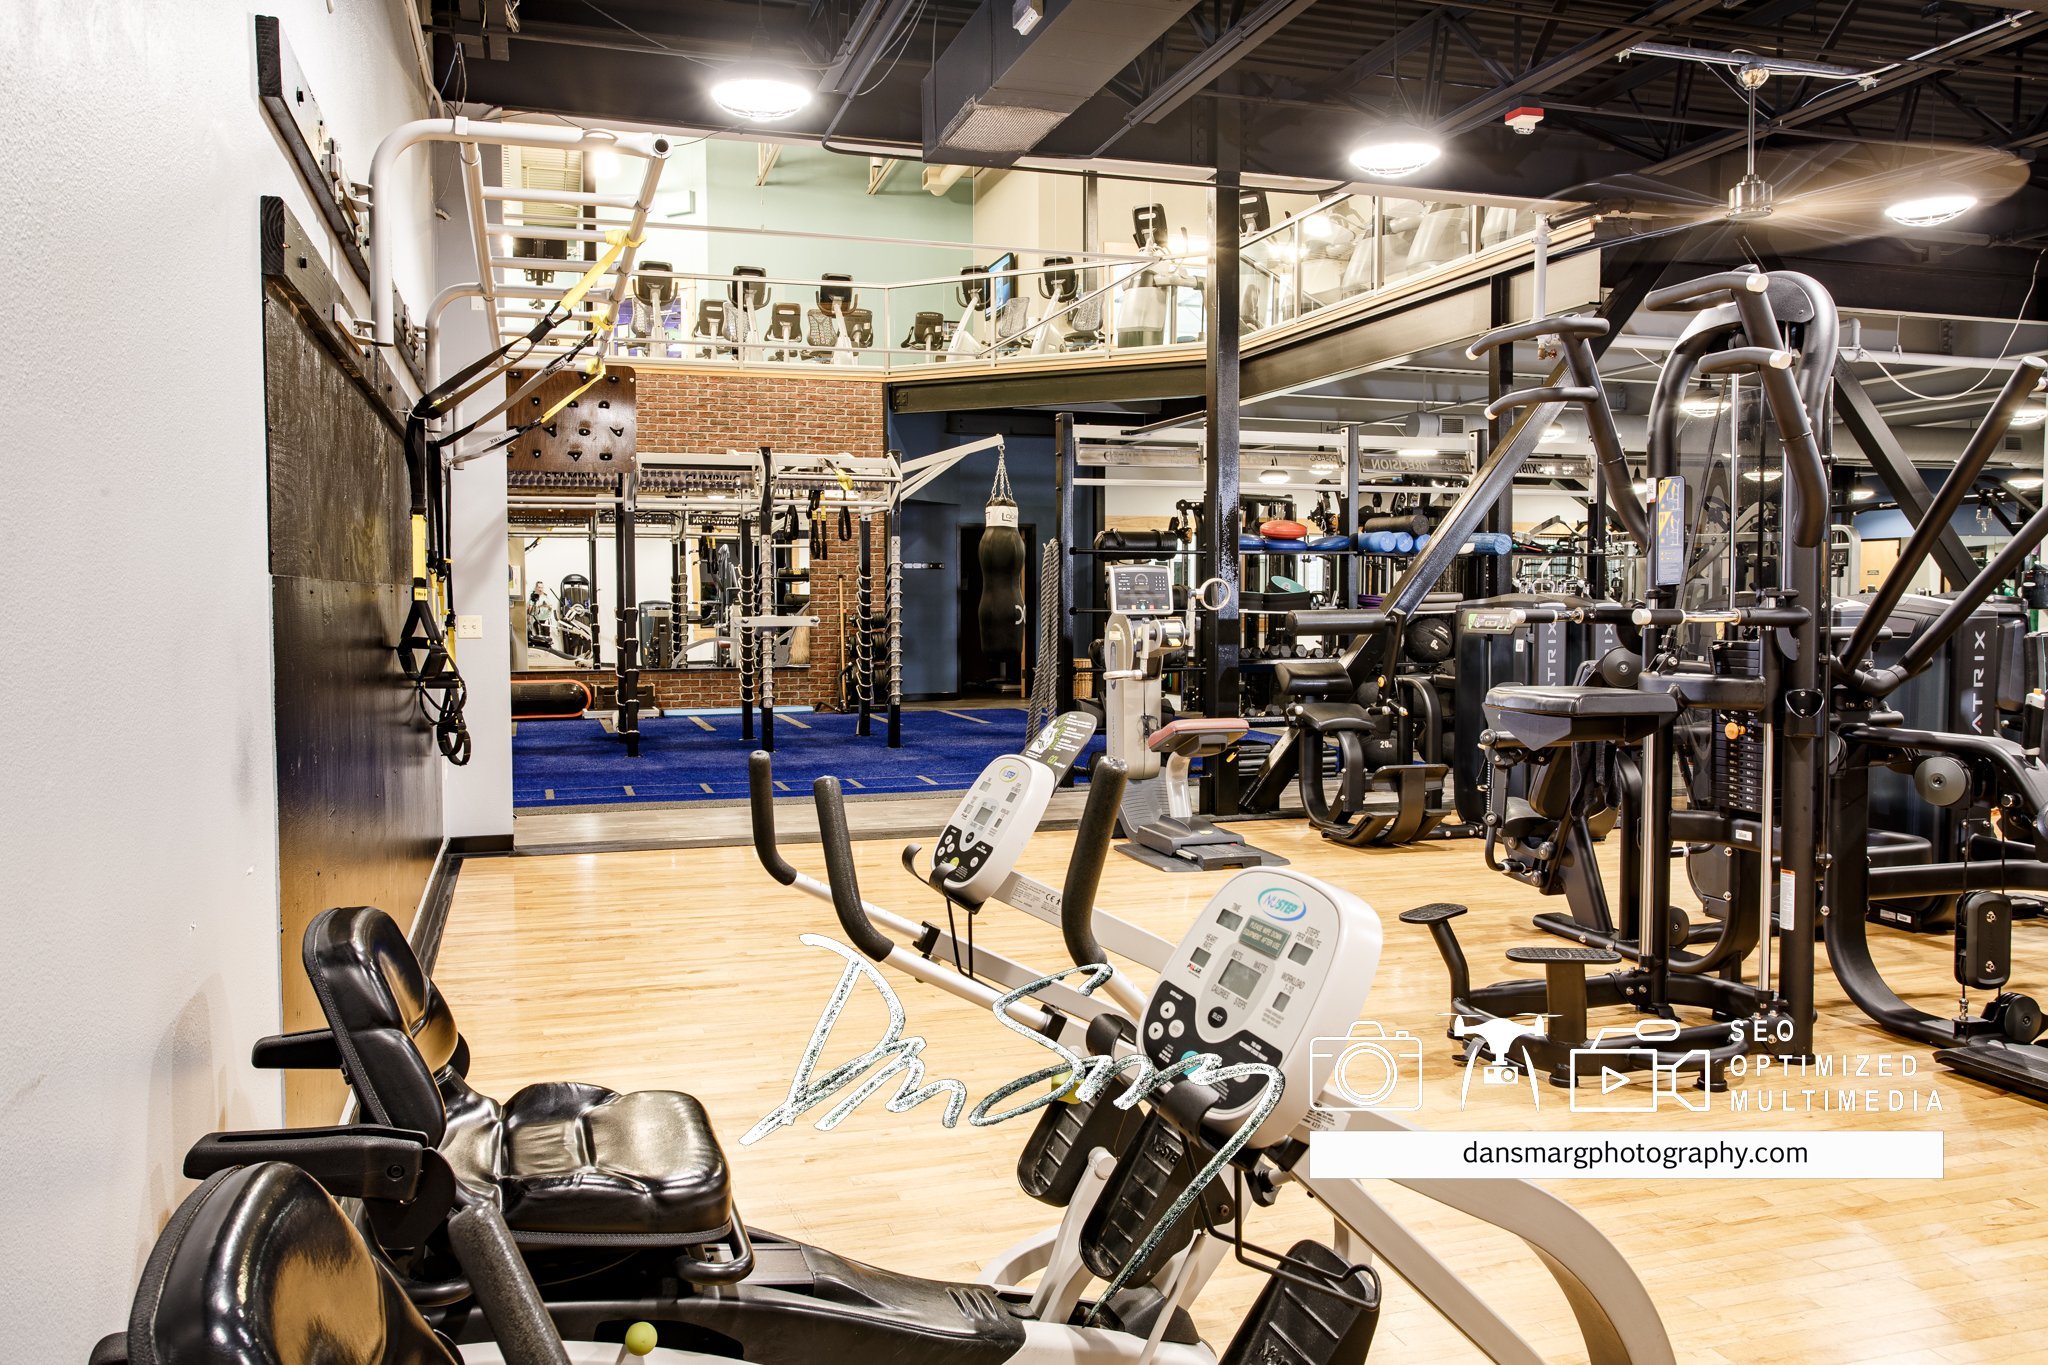 DanSmargPhotography.com-SEO-Optimmized-Multimedia-Content-The-Wave-Fitness-Center-Whitefish-Montana-28.jpg